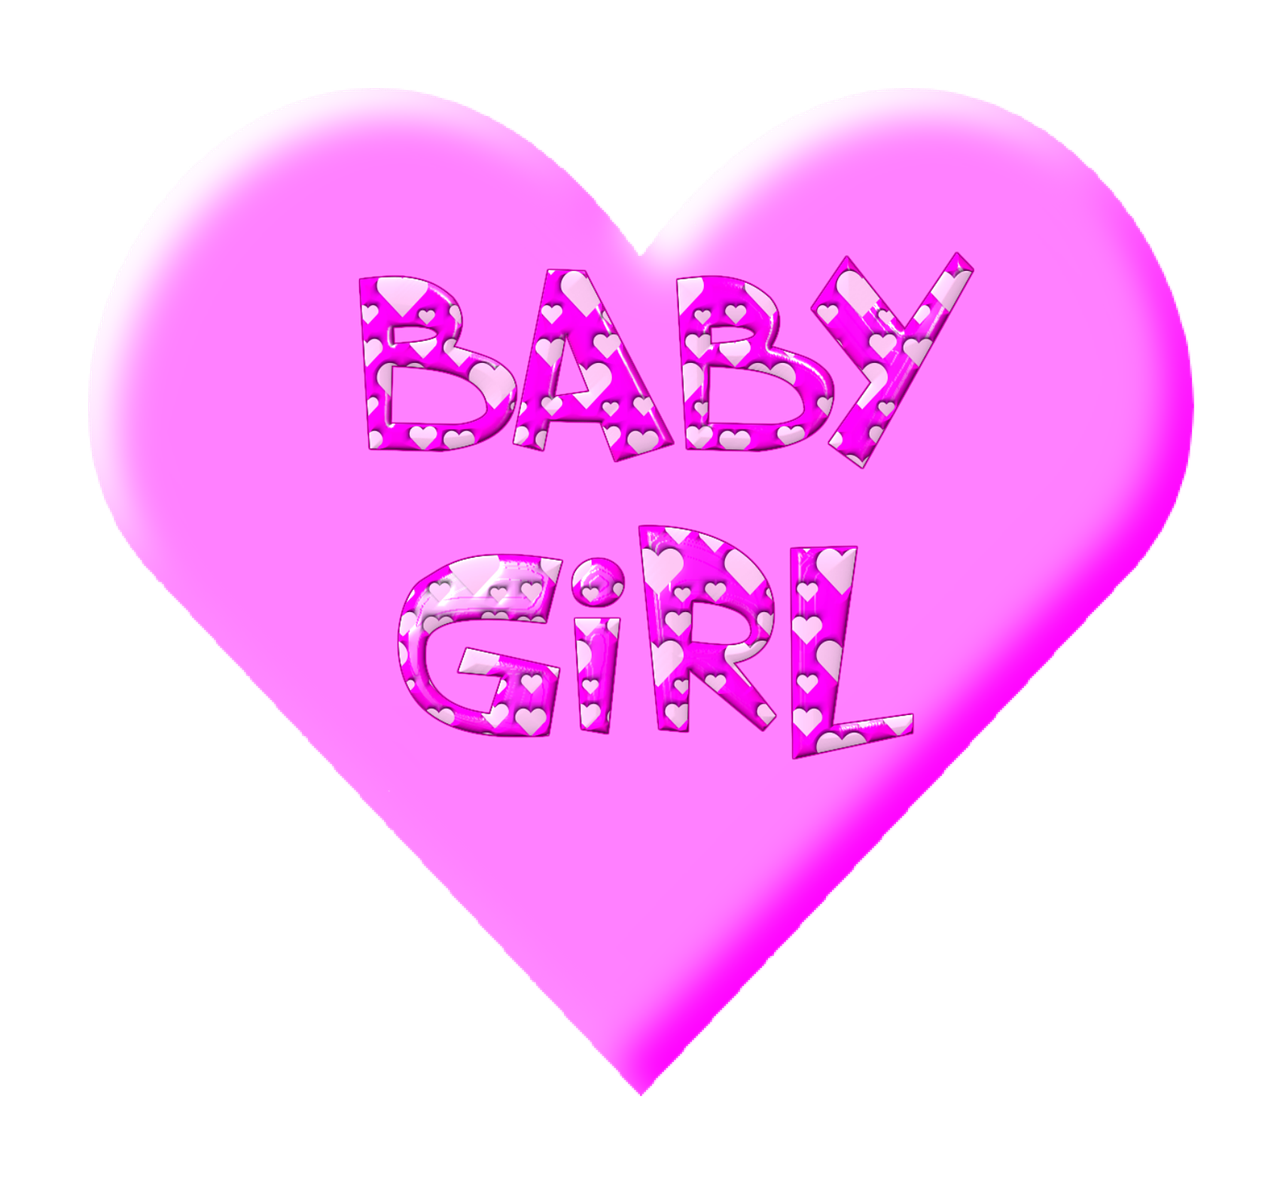 baby symbol the little girl free photo